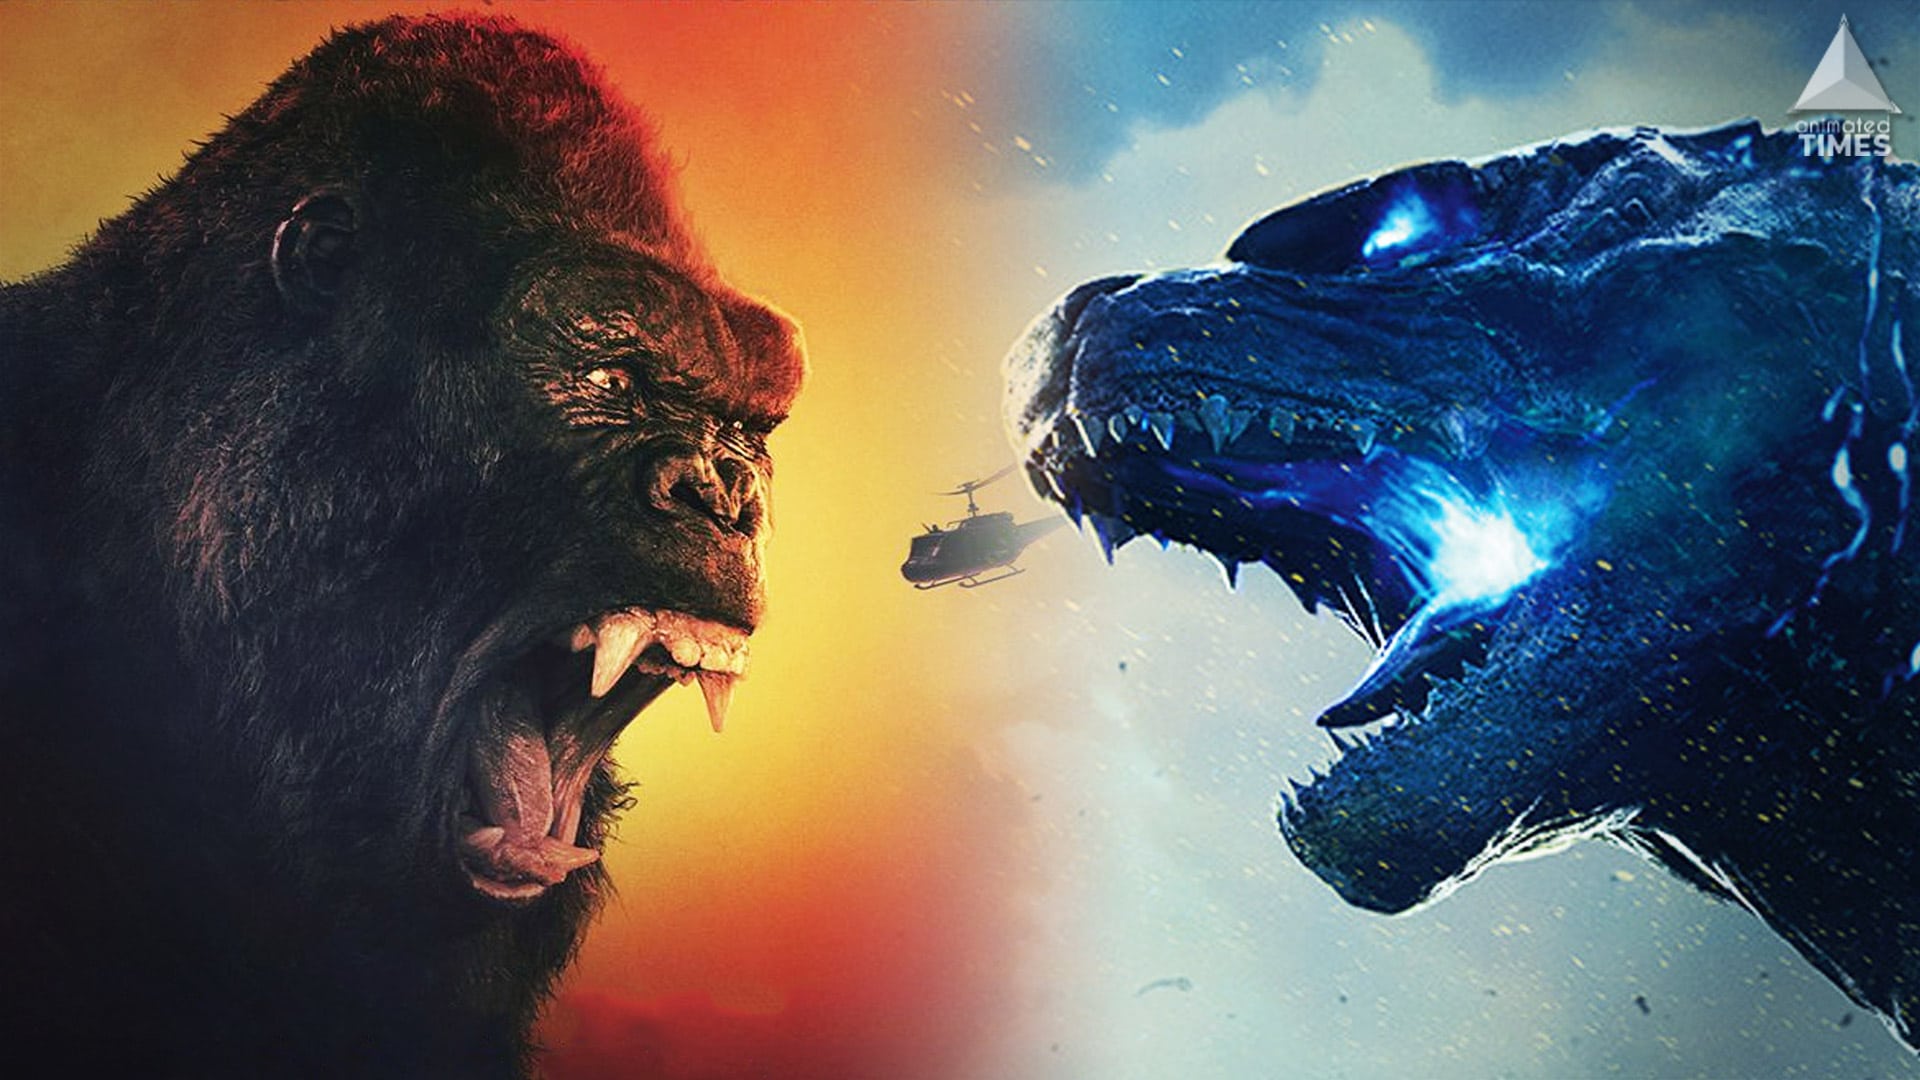 Godzilla vs. Kong : Which Monster Will Take The Crown?